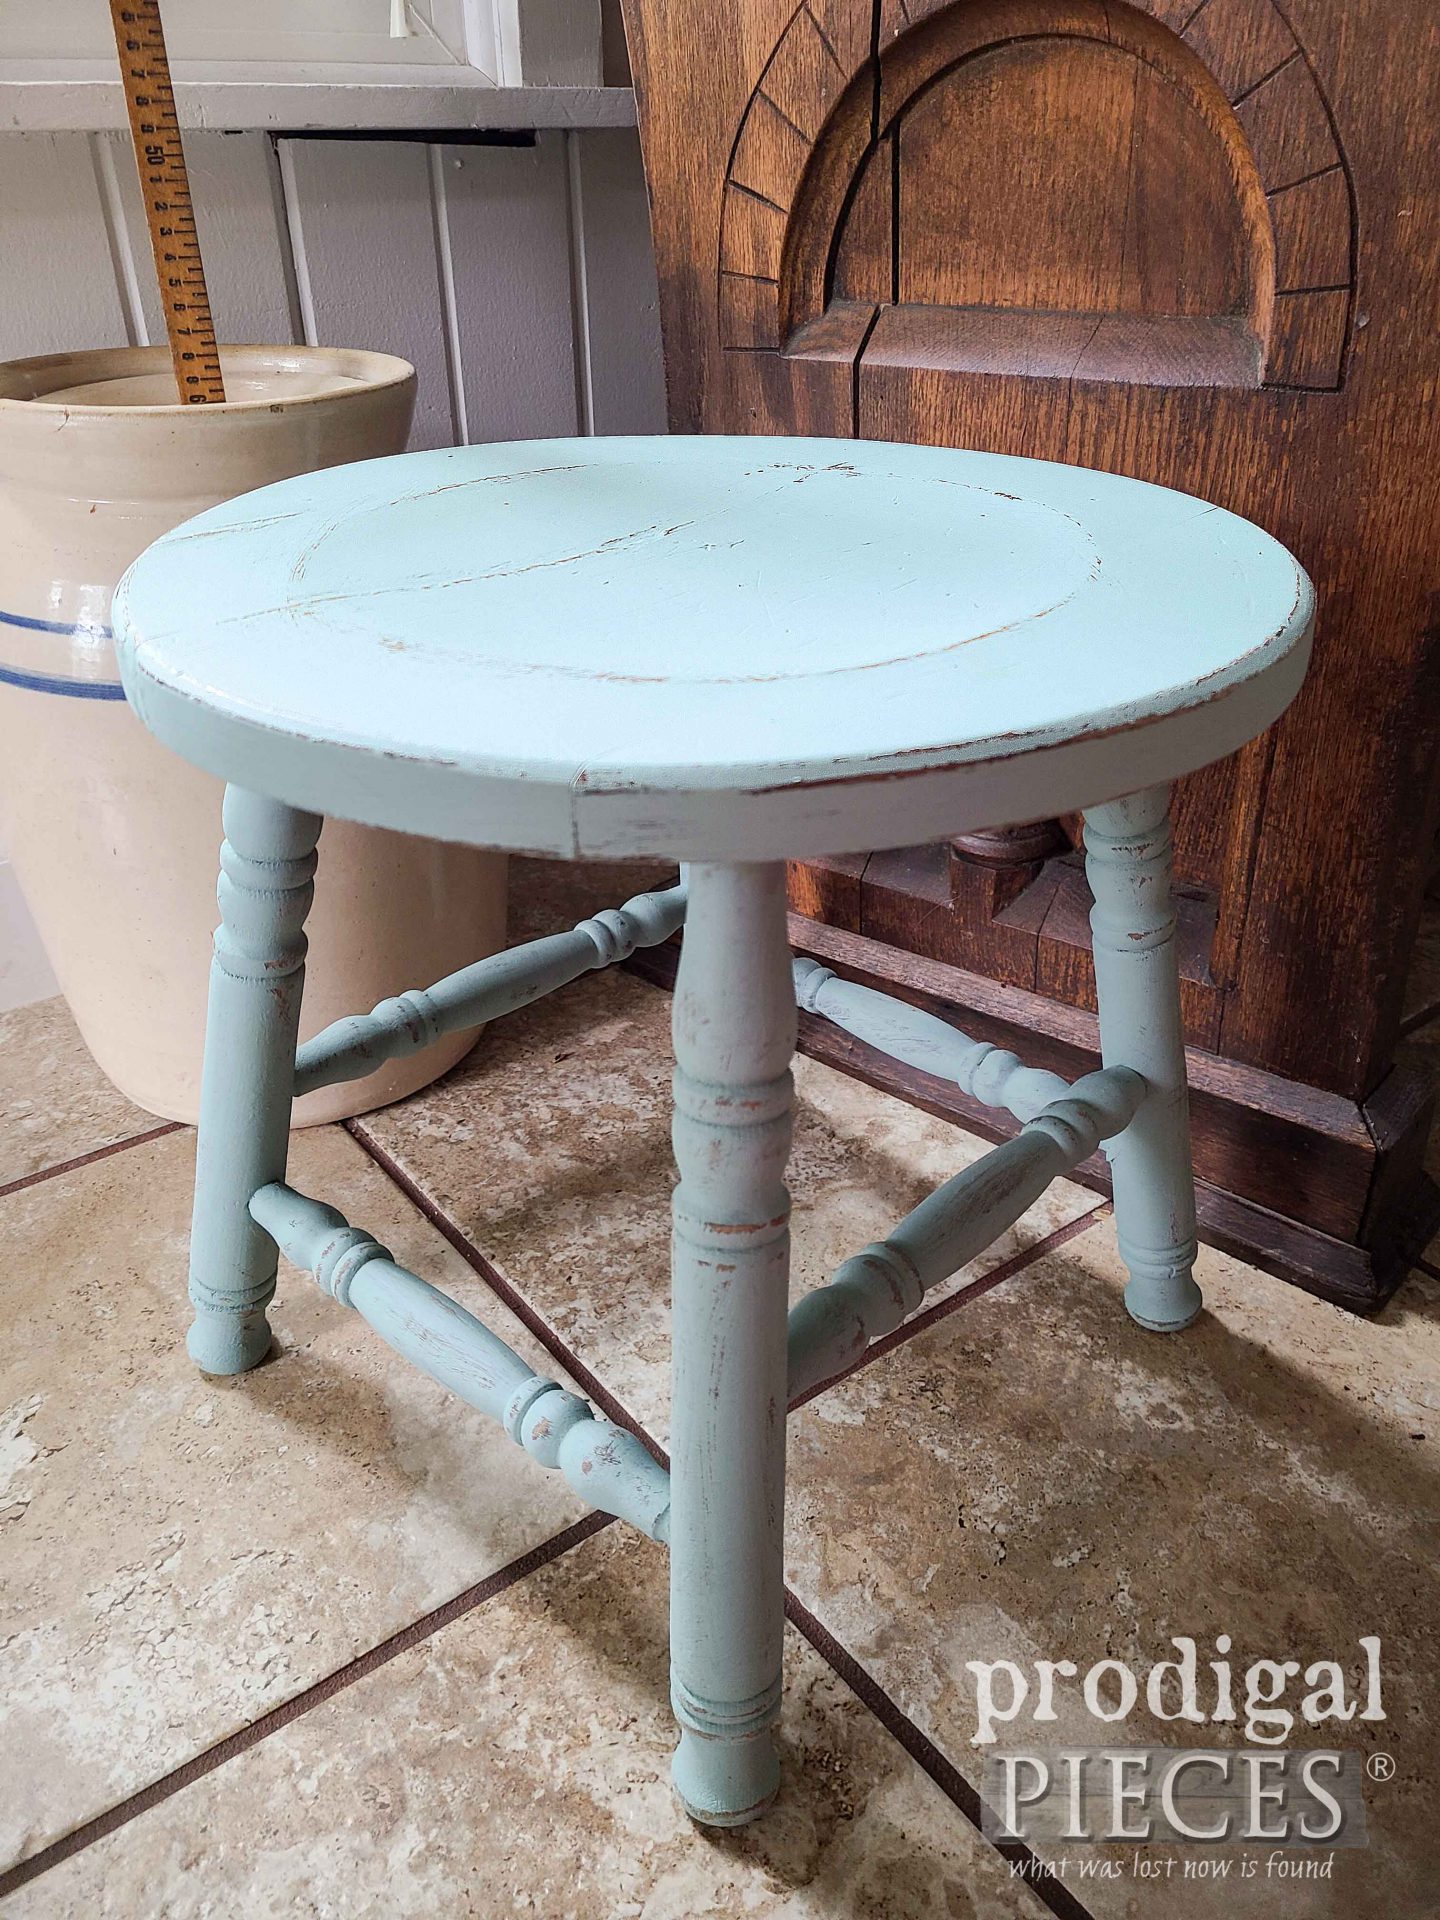 Vintage Milking Stool from Upcycled Bar Stool by Larissa of Prodigal Pieces | prodigalpieces.com #prodigalpieces #farmhouse #diy #home #upcycled